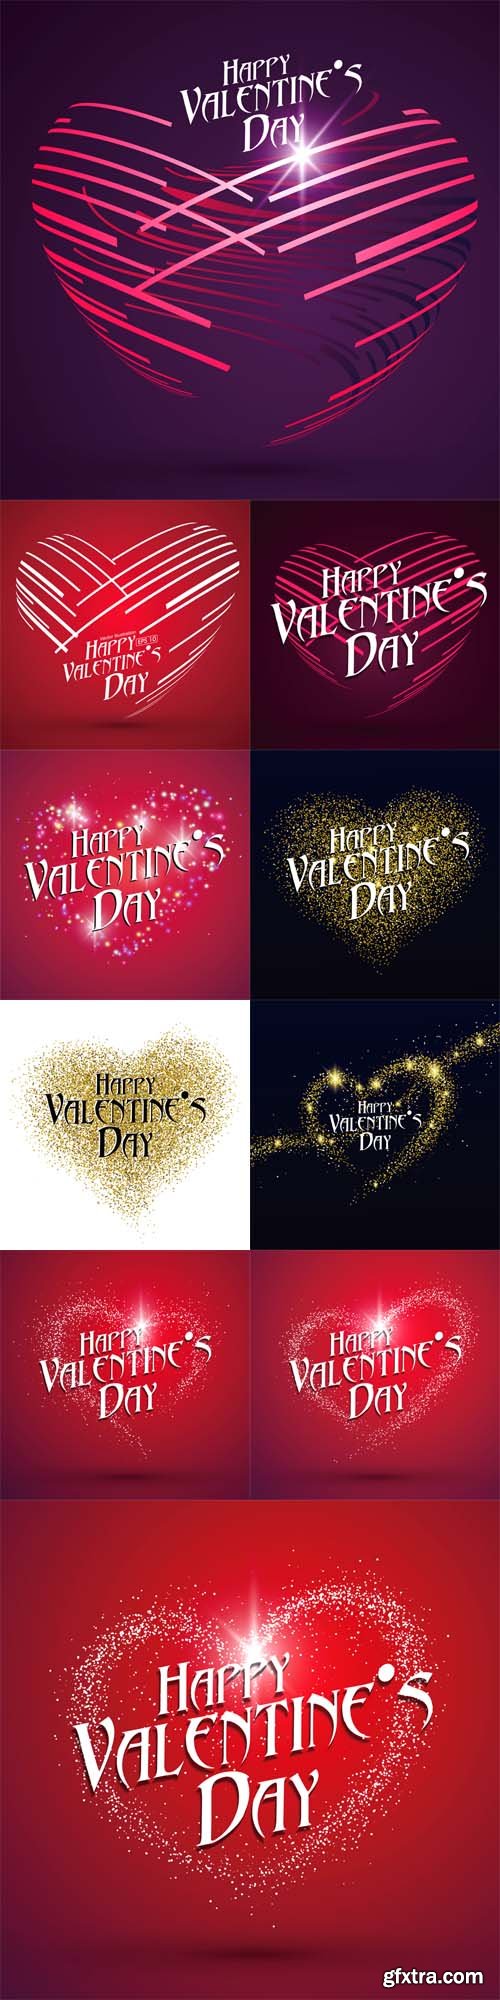 Vector Set - Abstract heart-shaped pattern. Valentines Day greeting cards available